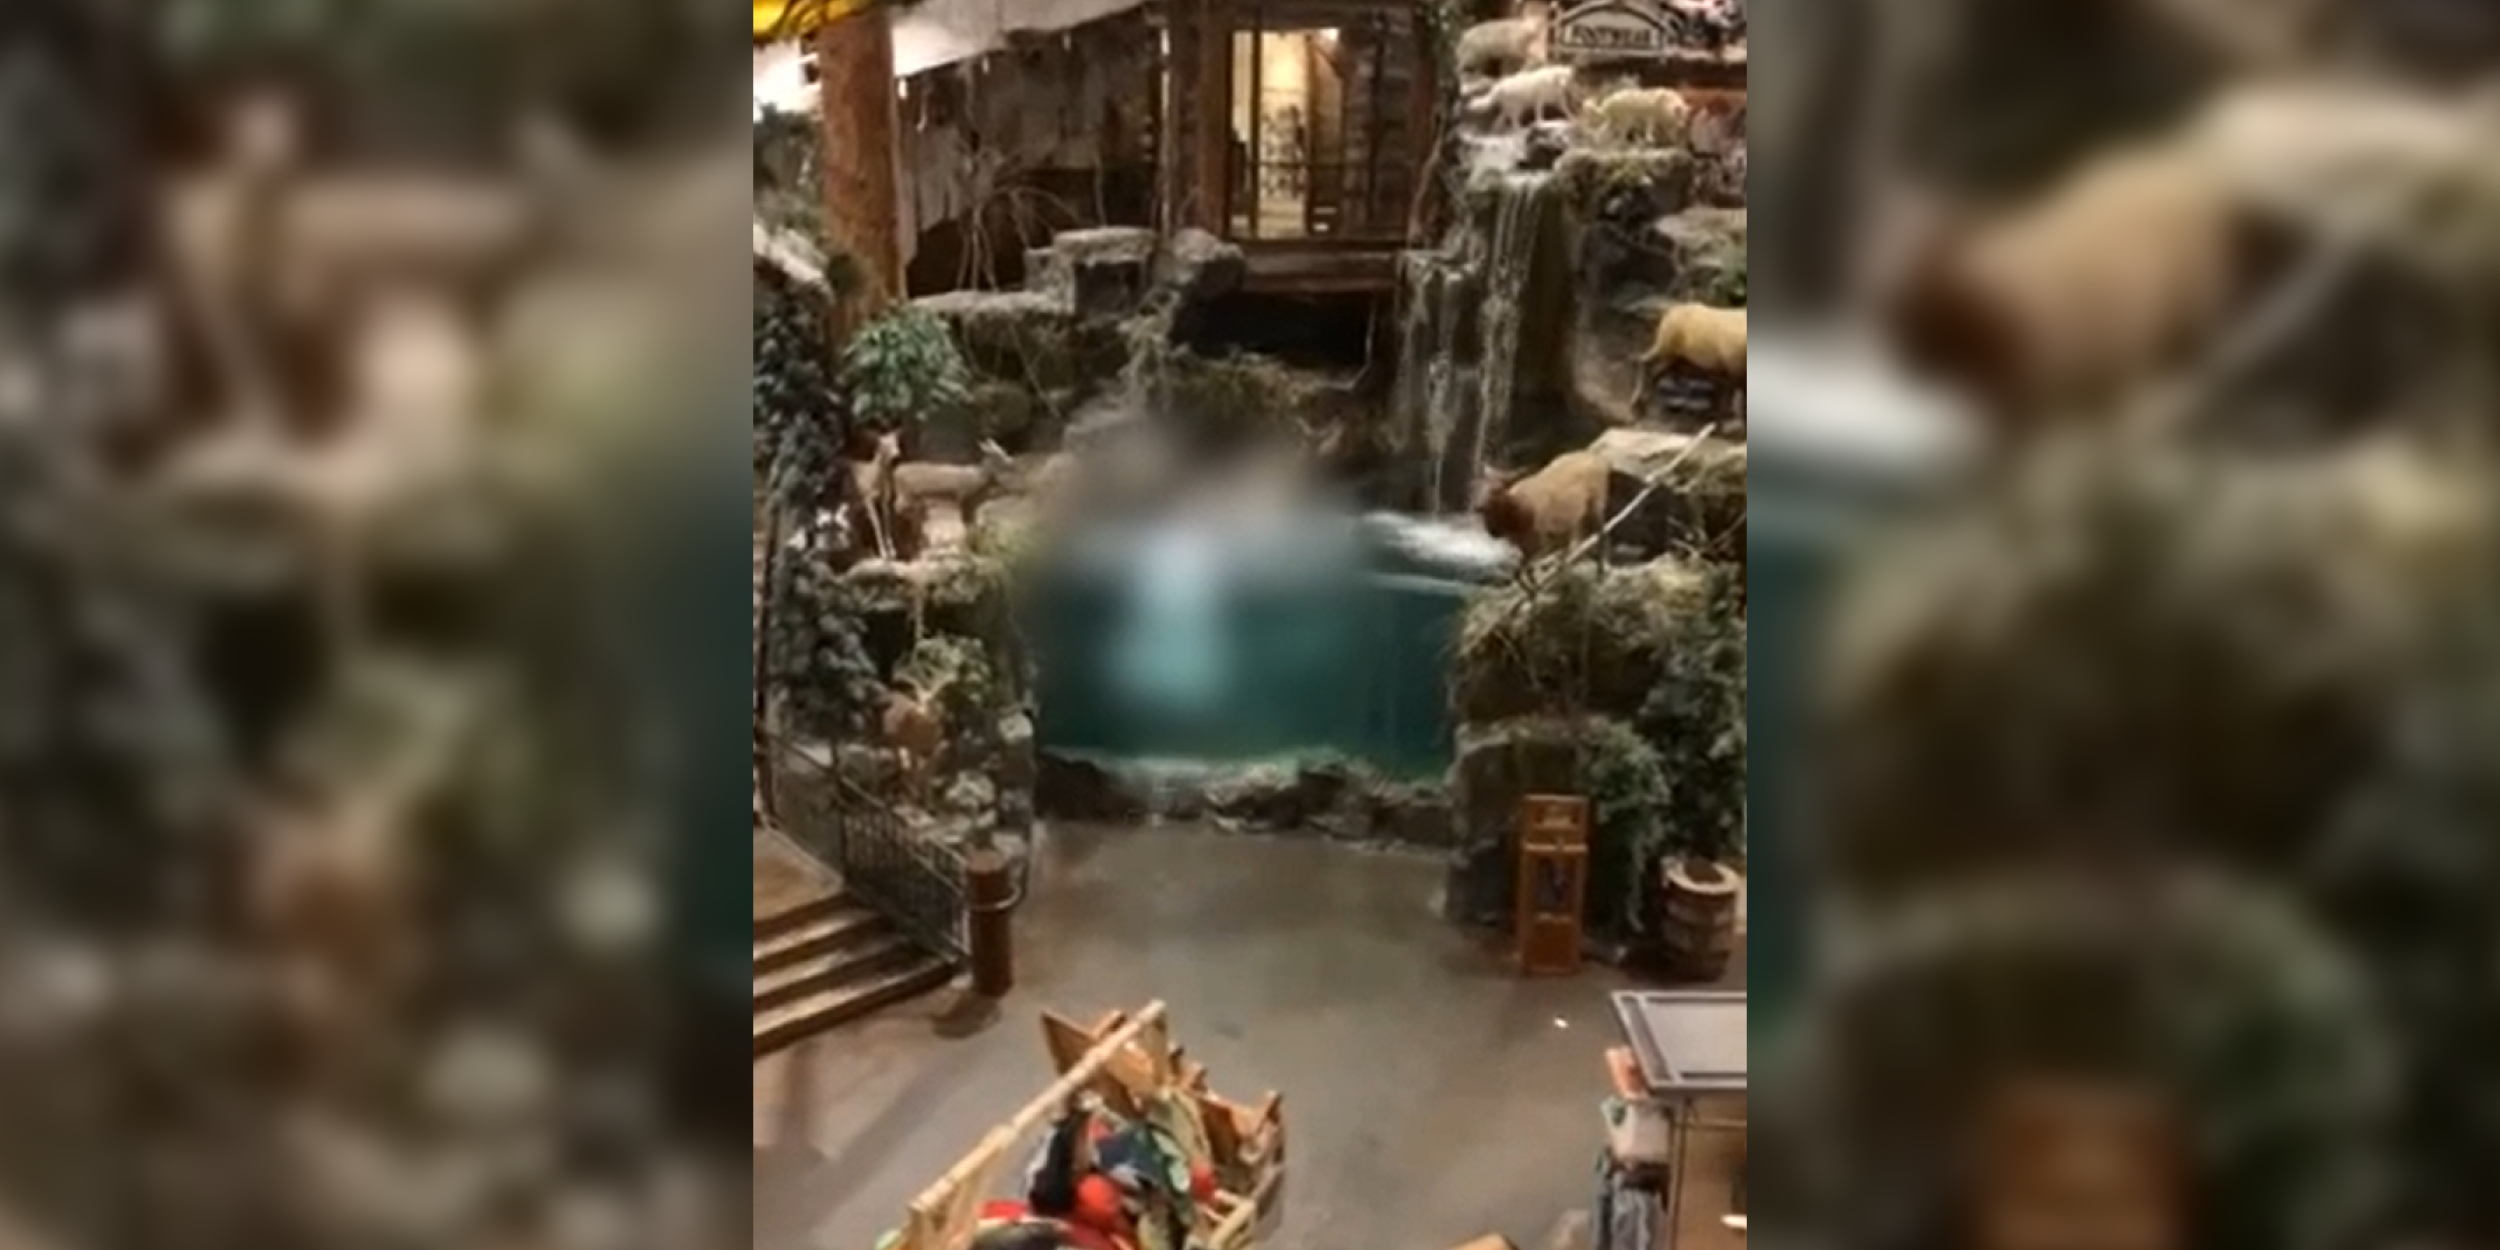 Alabama man arrested after skinny dipping in Bass Pro Shops